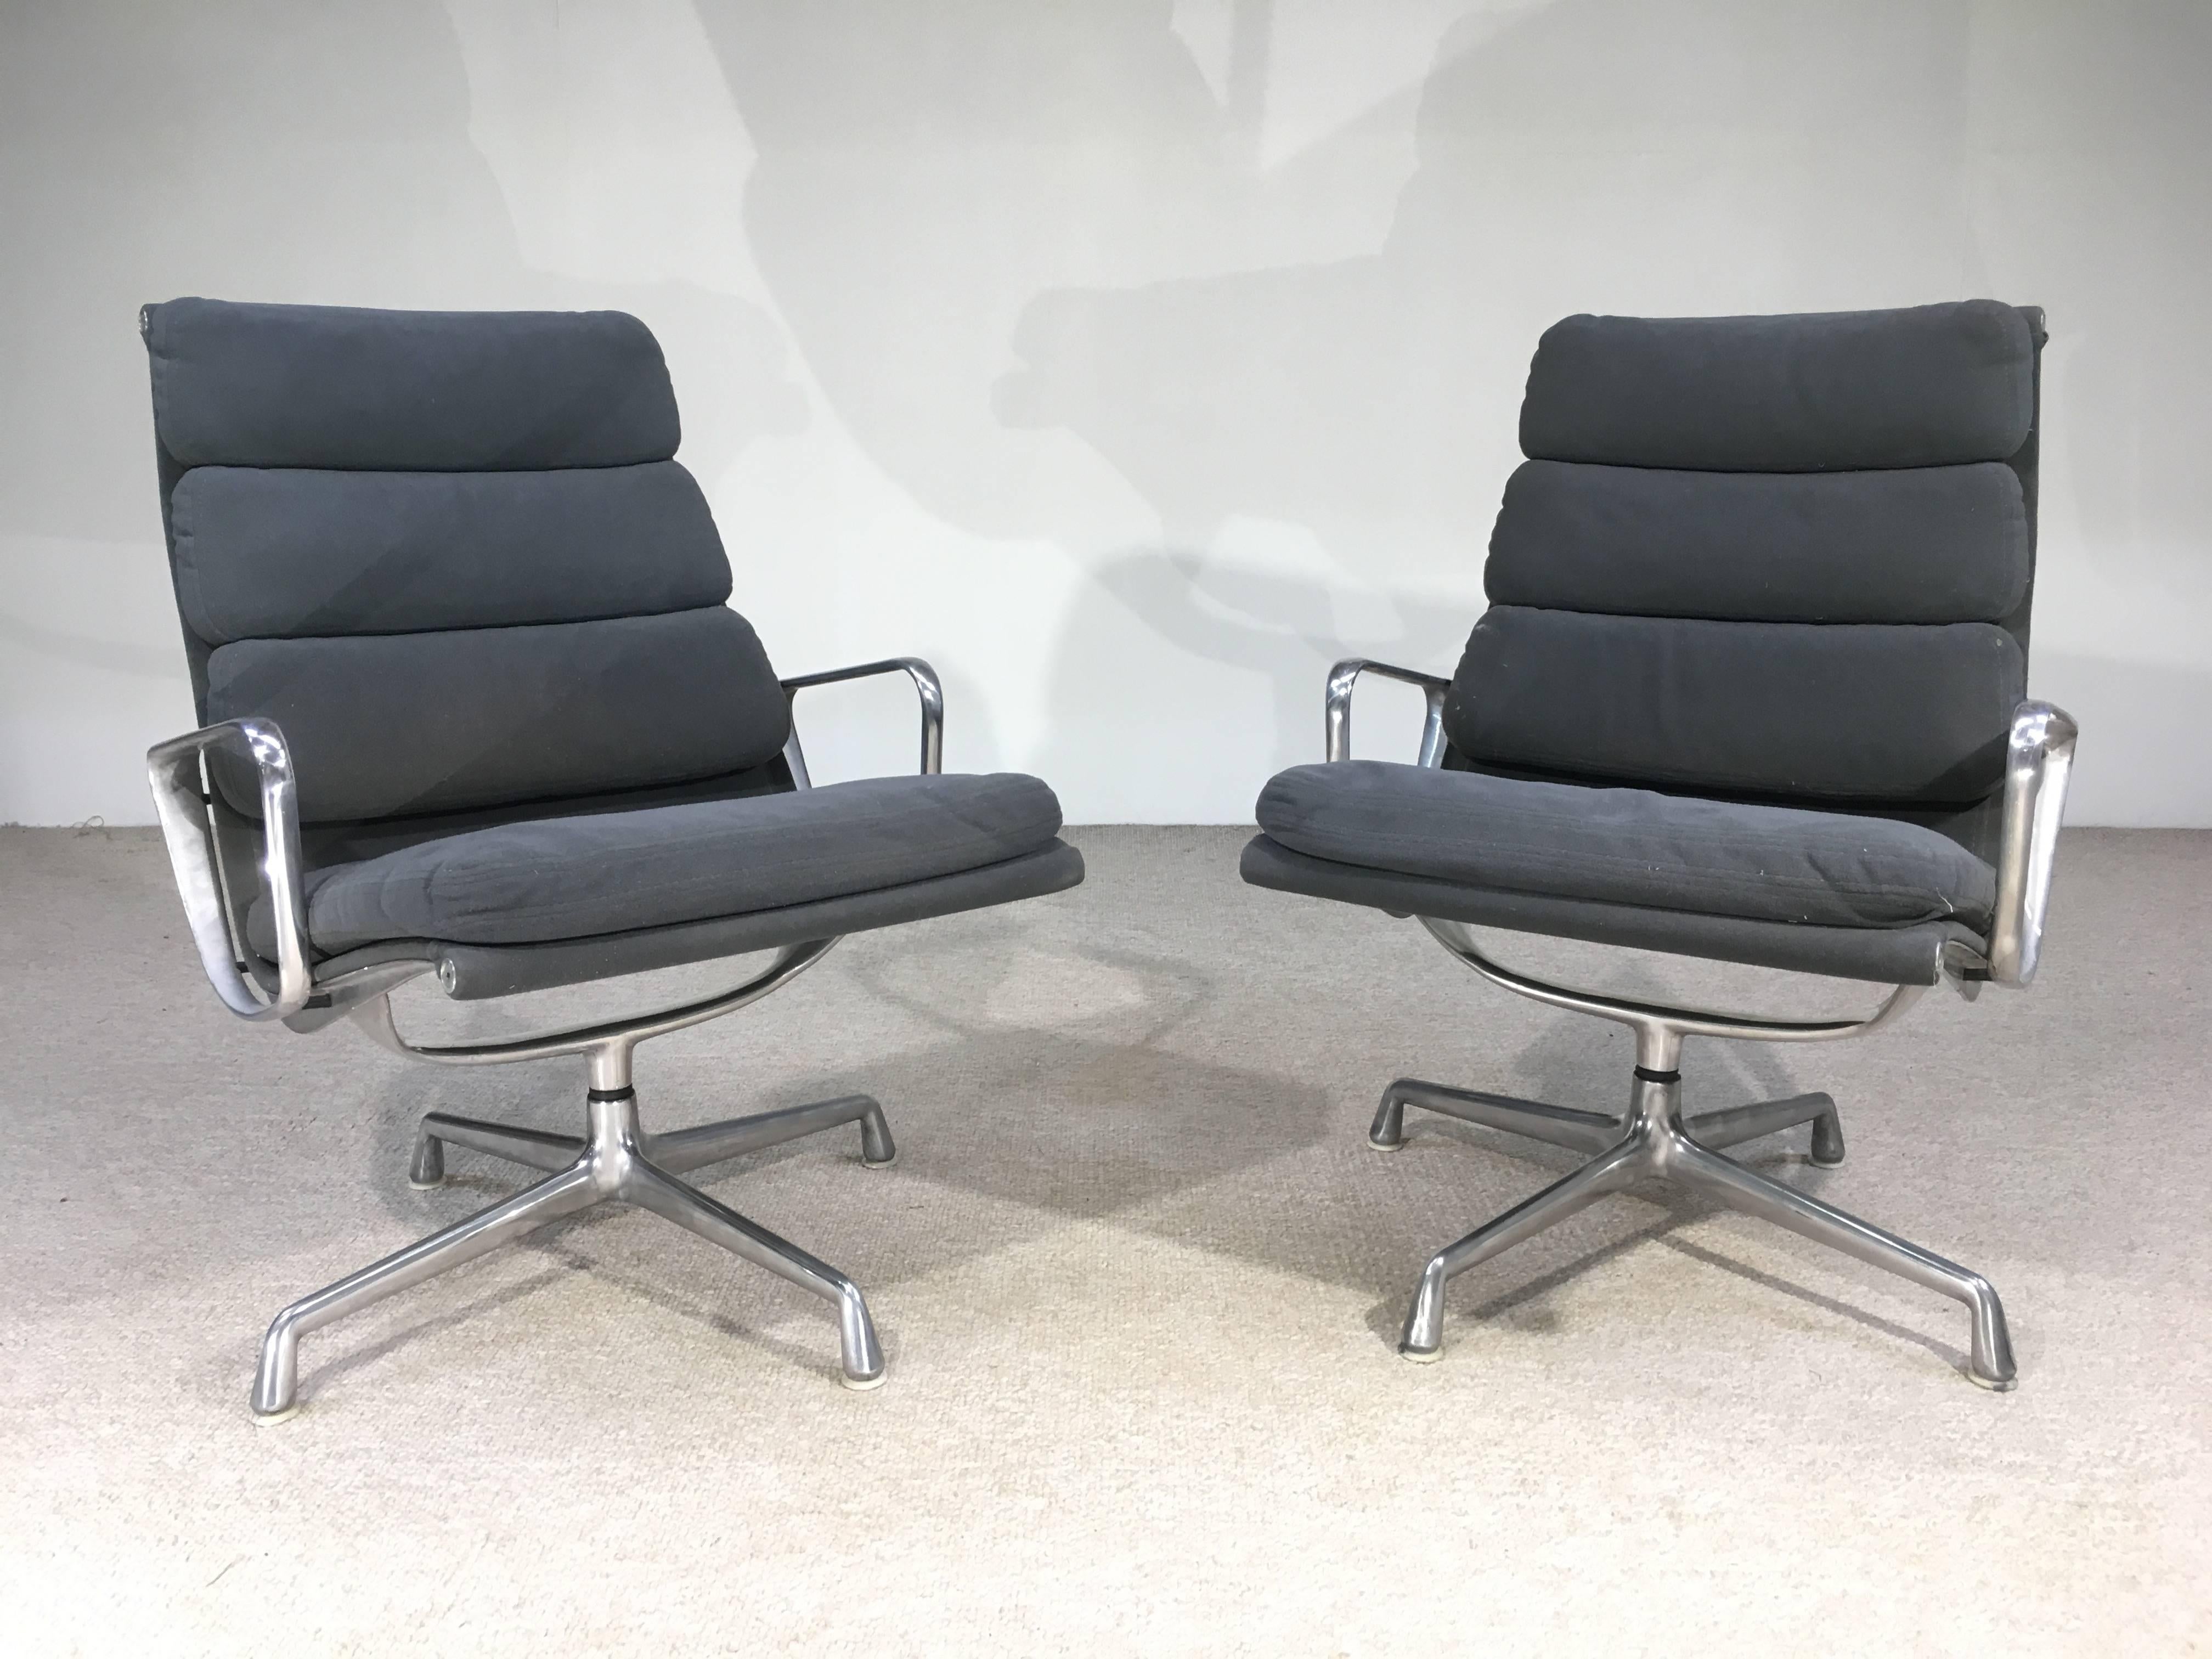 Soft pad aluminium group reclining and adjustable cloth arm chairs by Charles and Ray Eames for Herman Miller. Excellent swivel smoothness and silent reclining operation.
Some slight patina to the aluminium and soiling in areas to the original